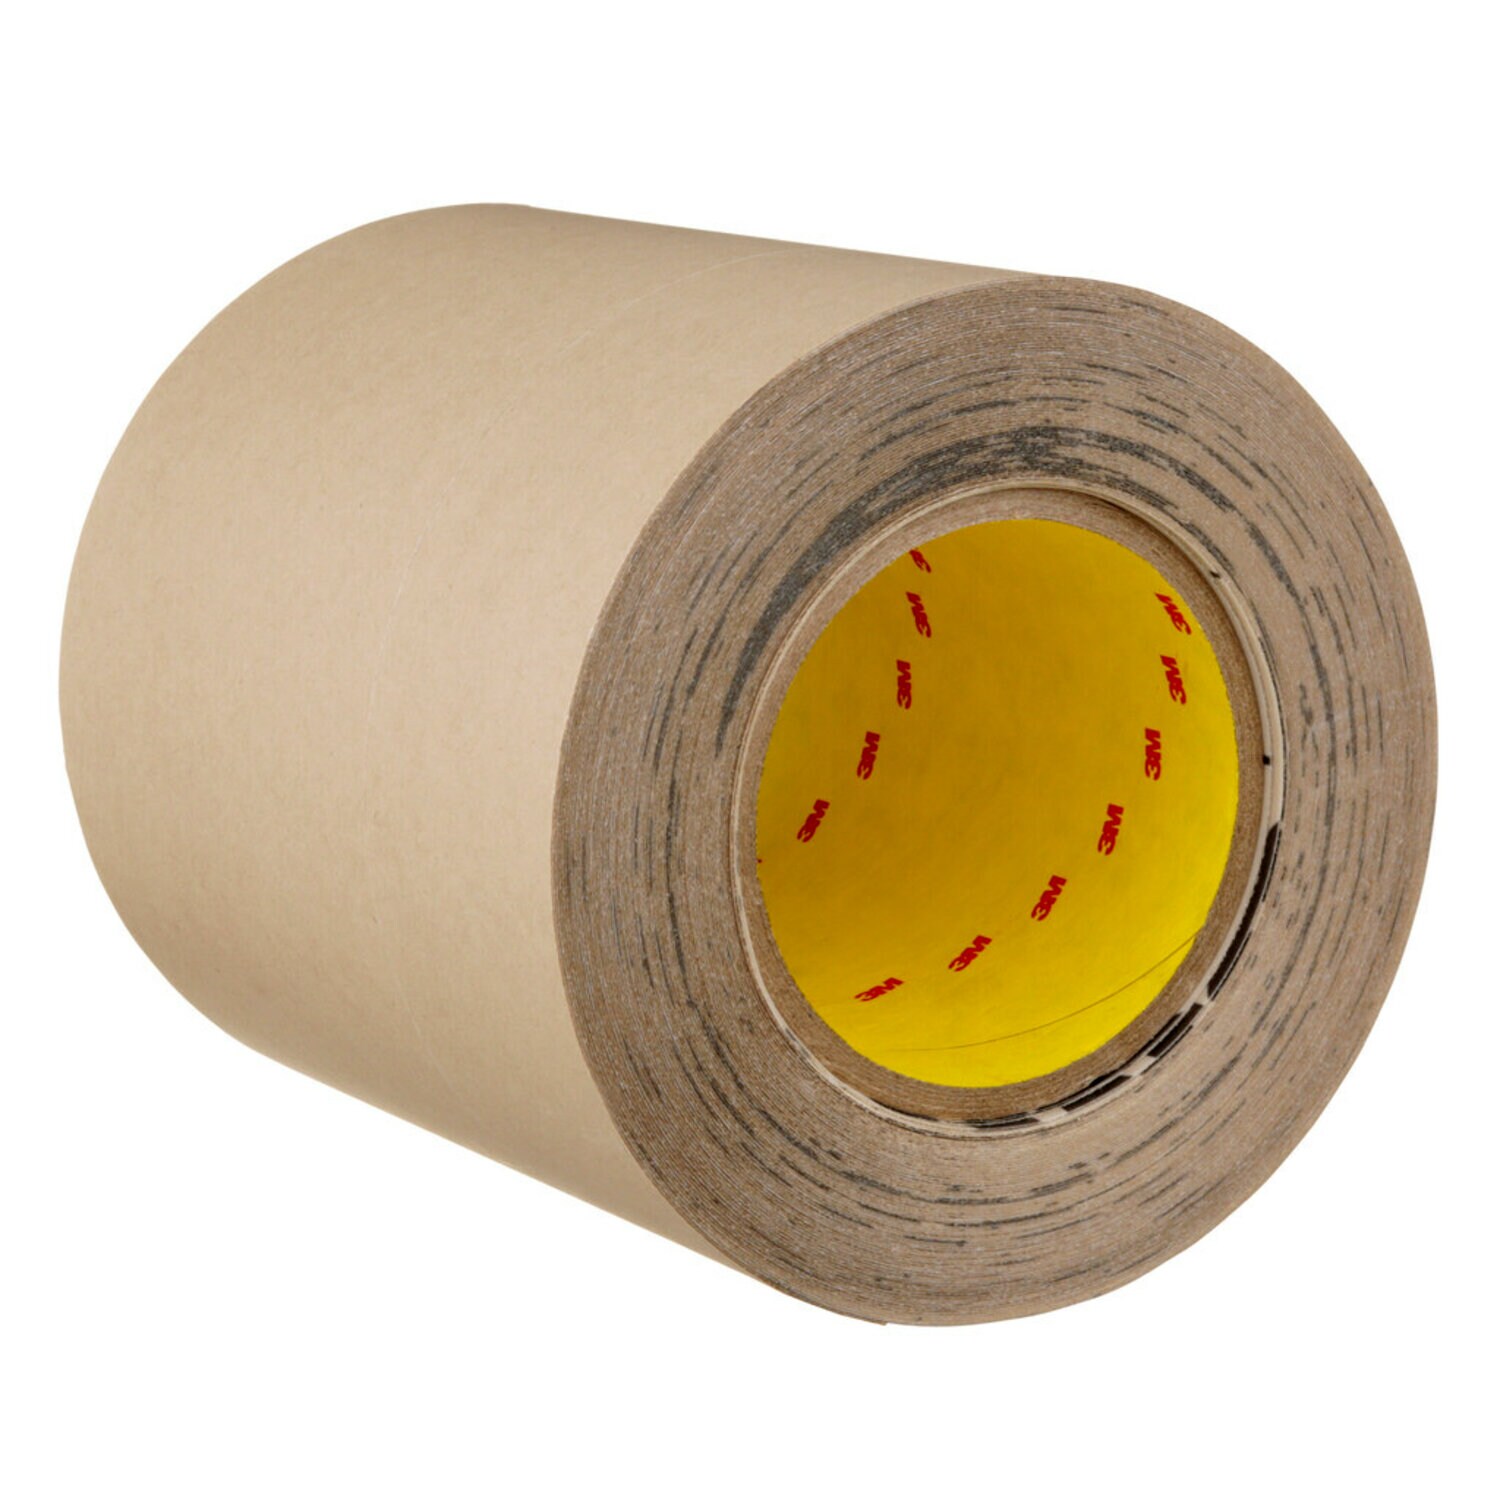 7000049772 - 3M All Weather Flashing Tape 8067 Tan, 6 in x 75 ft, 8 Roll/Case, Slit
Liner (2-4 Slit)